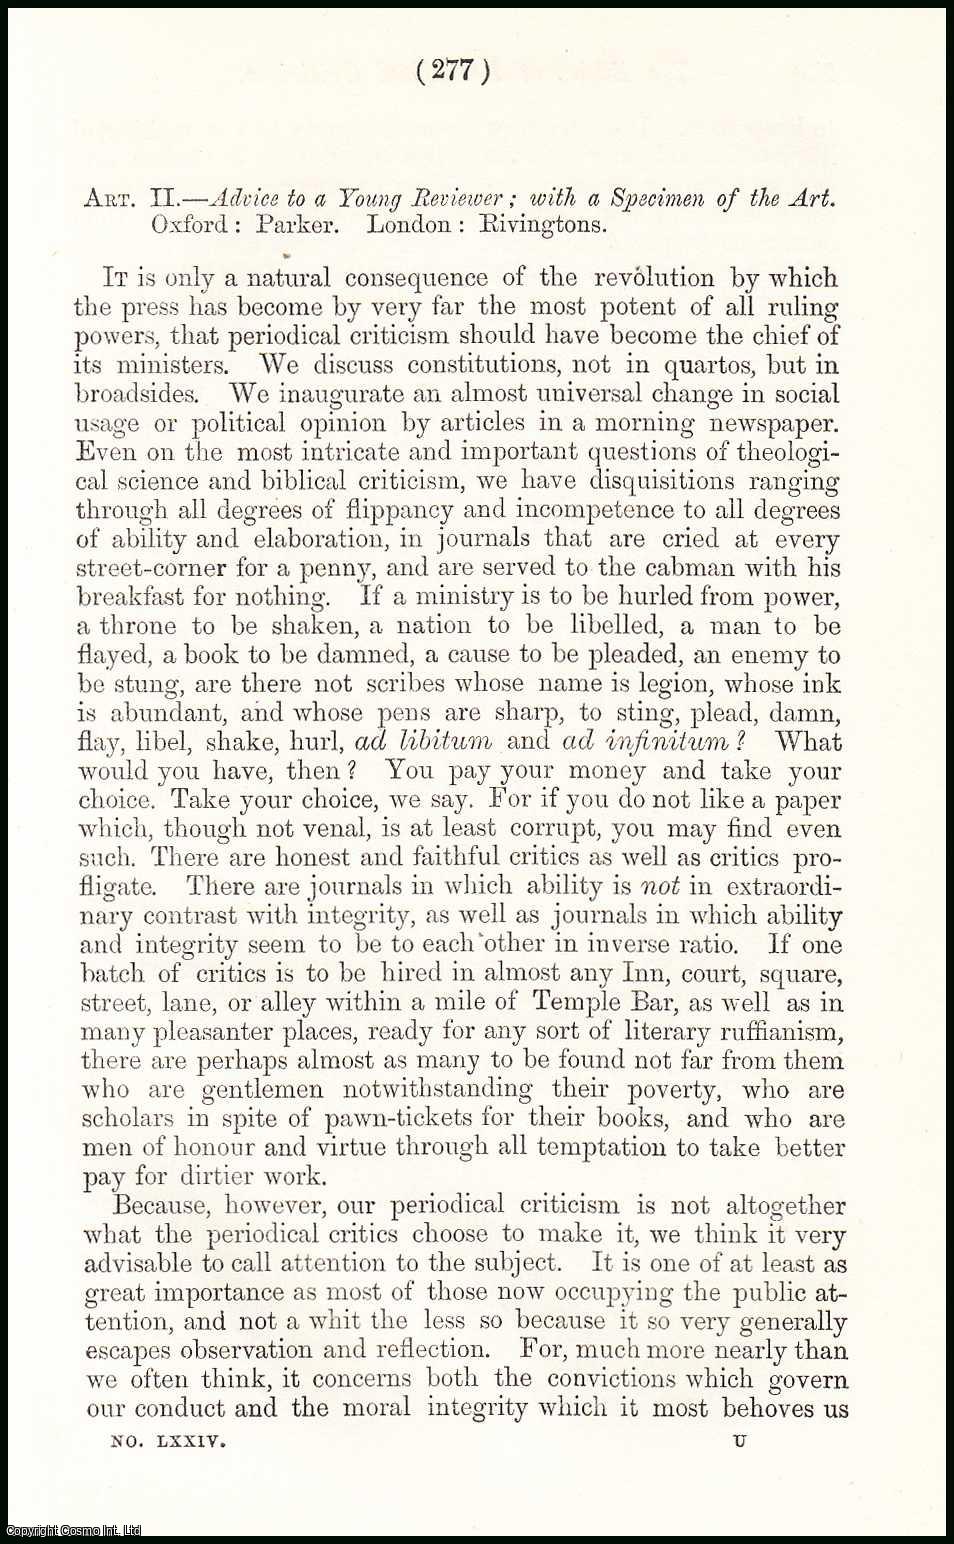 Author Unknown - The Ethics of Periodical Criticism. A rare original article from the British Quarterly Review, 1863.